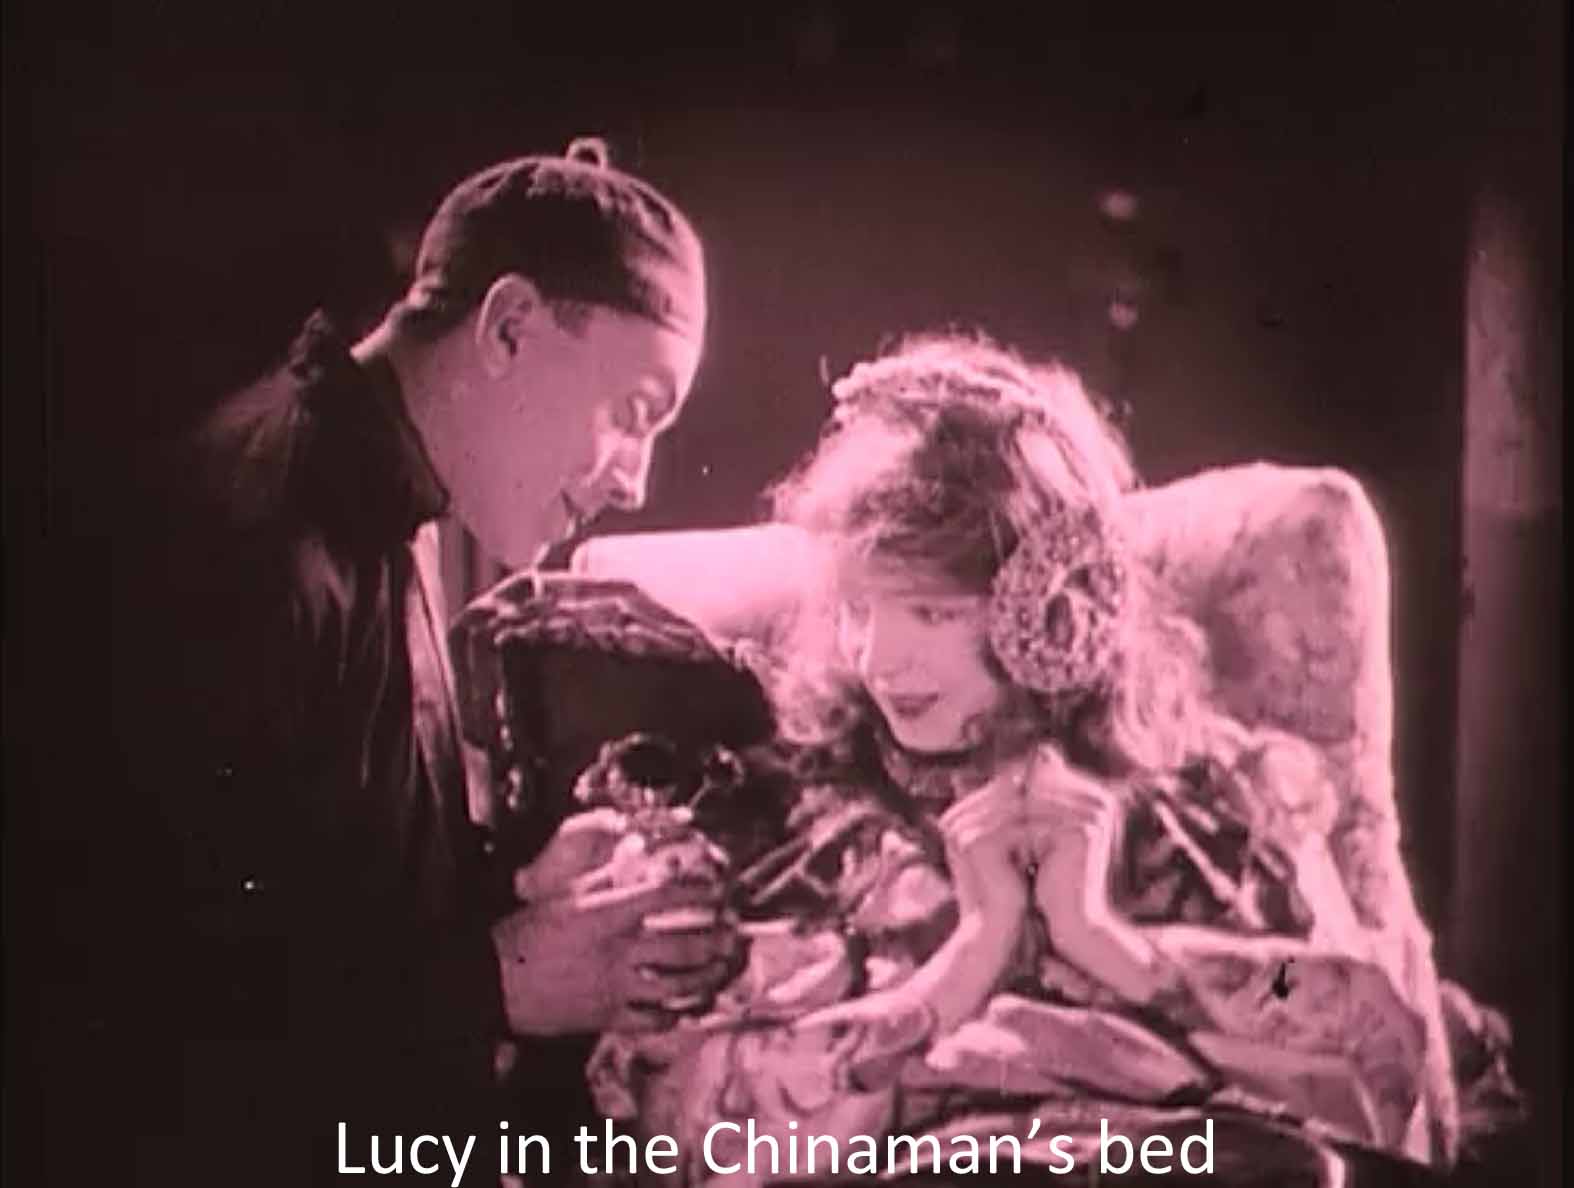 Lucy in the Chinaman's bed